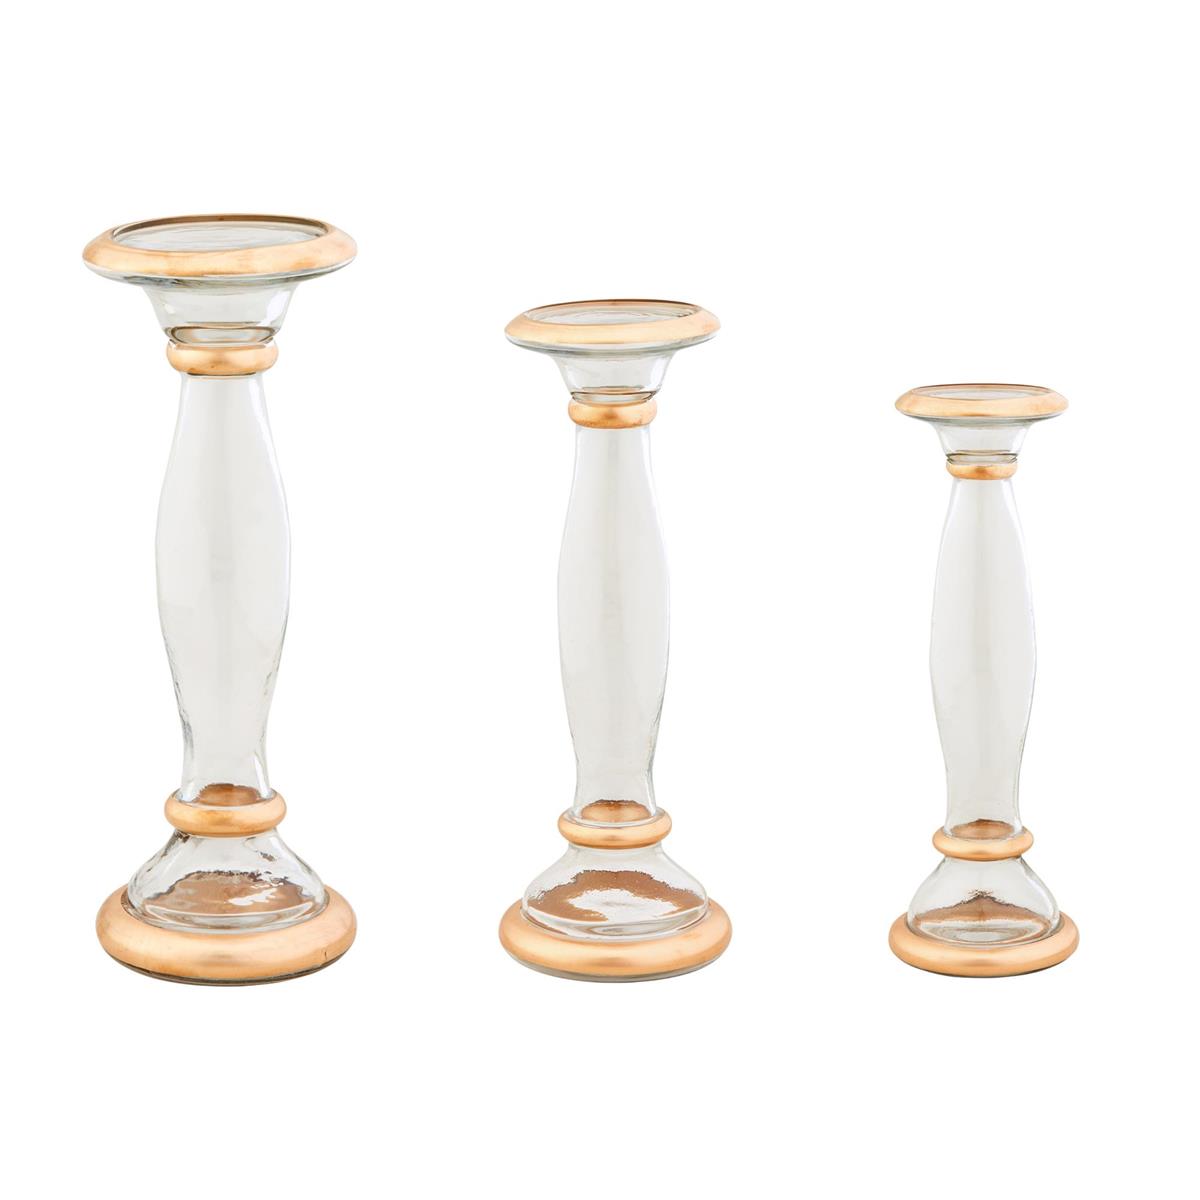 3 sizes of glass and gold candlesticks on a white background.